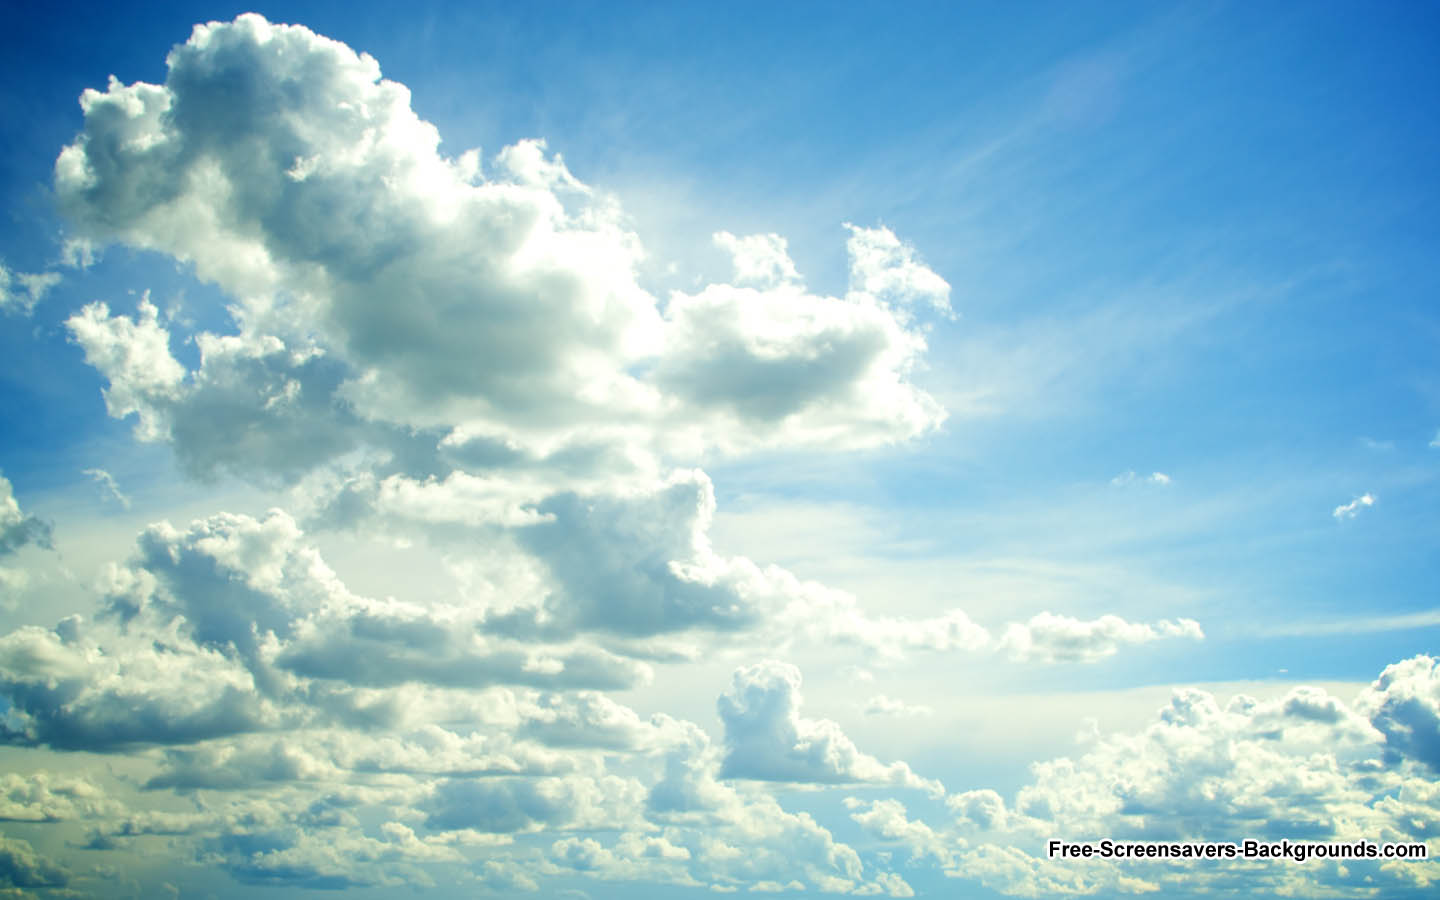 Clouds Over Prairie Sky   Free Screensavers and Backgrounds